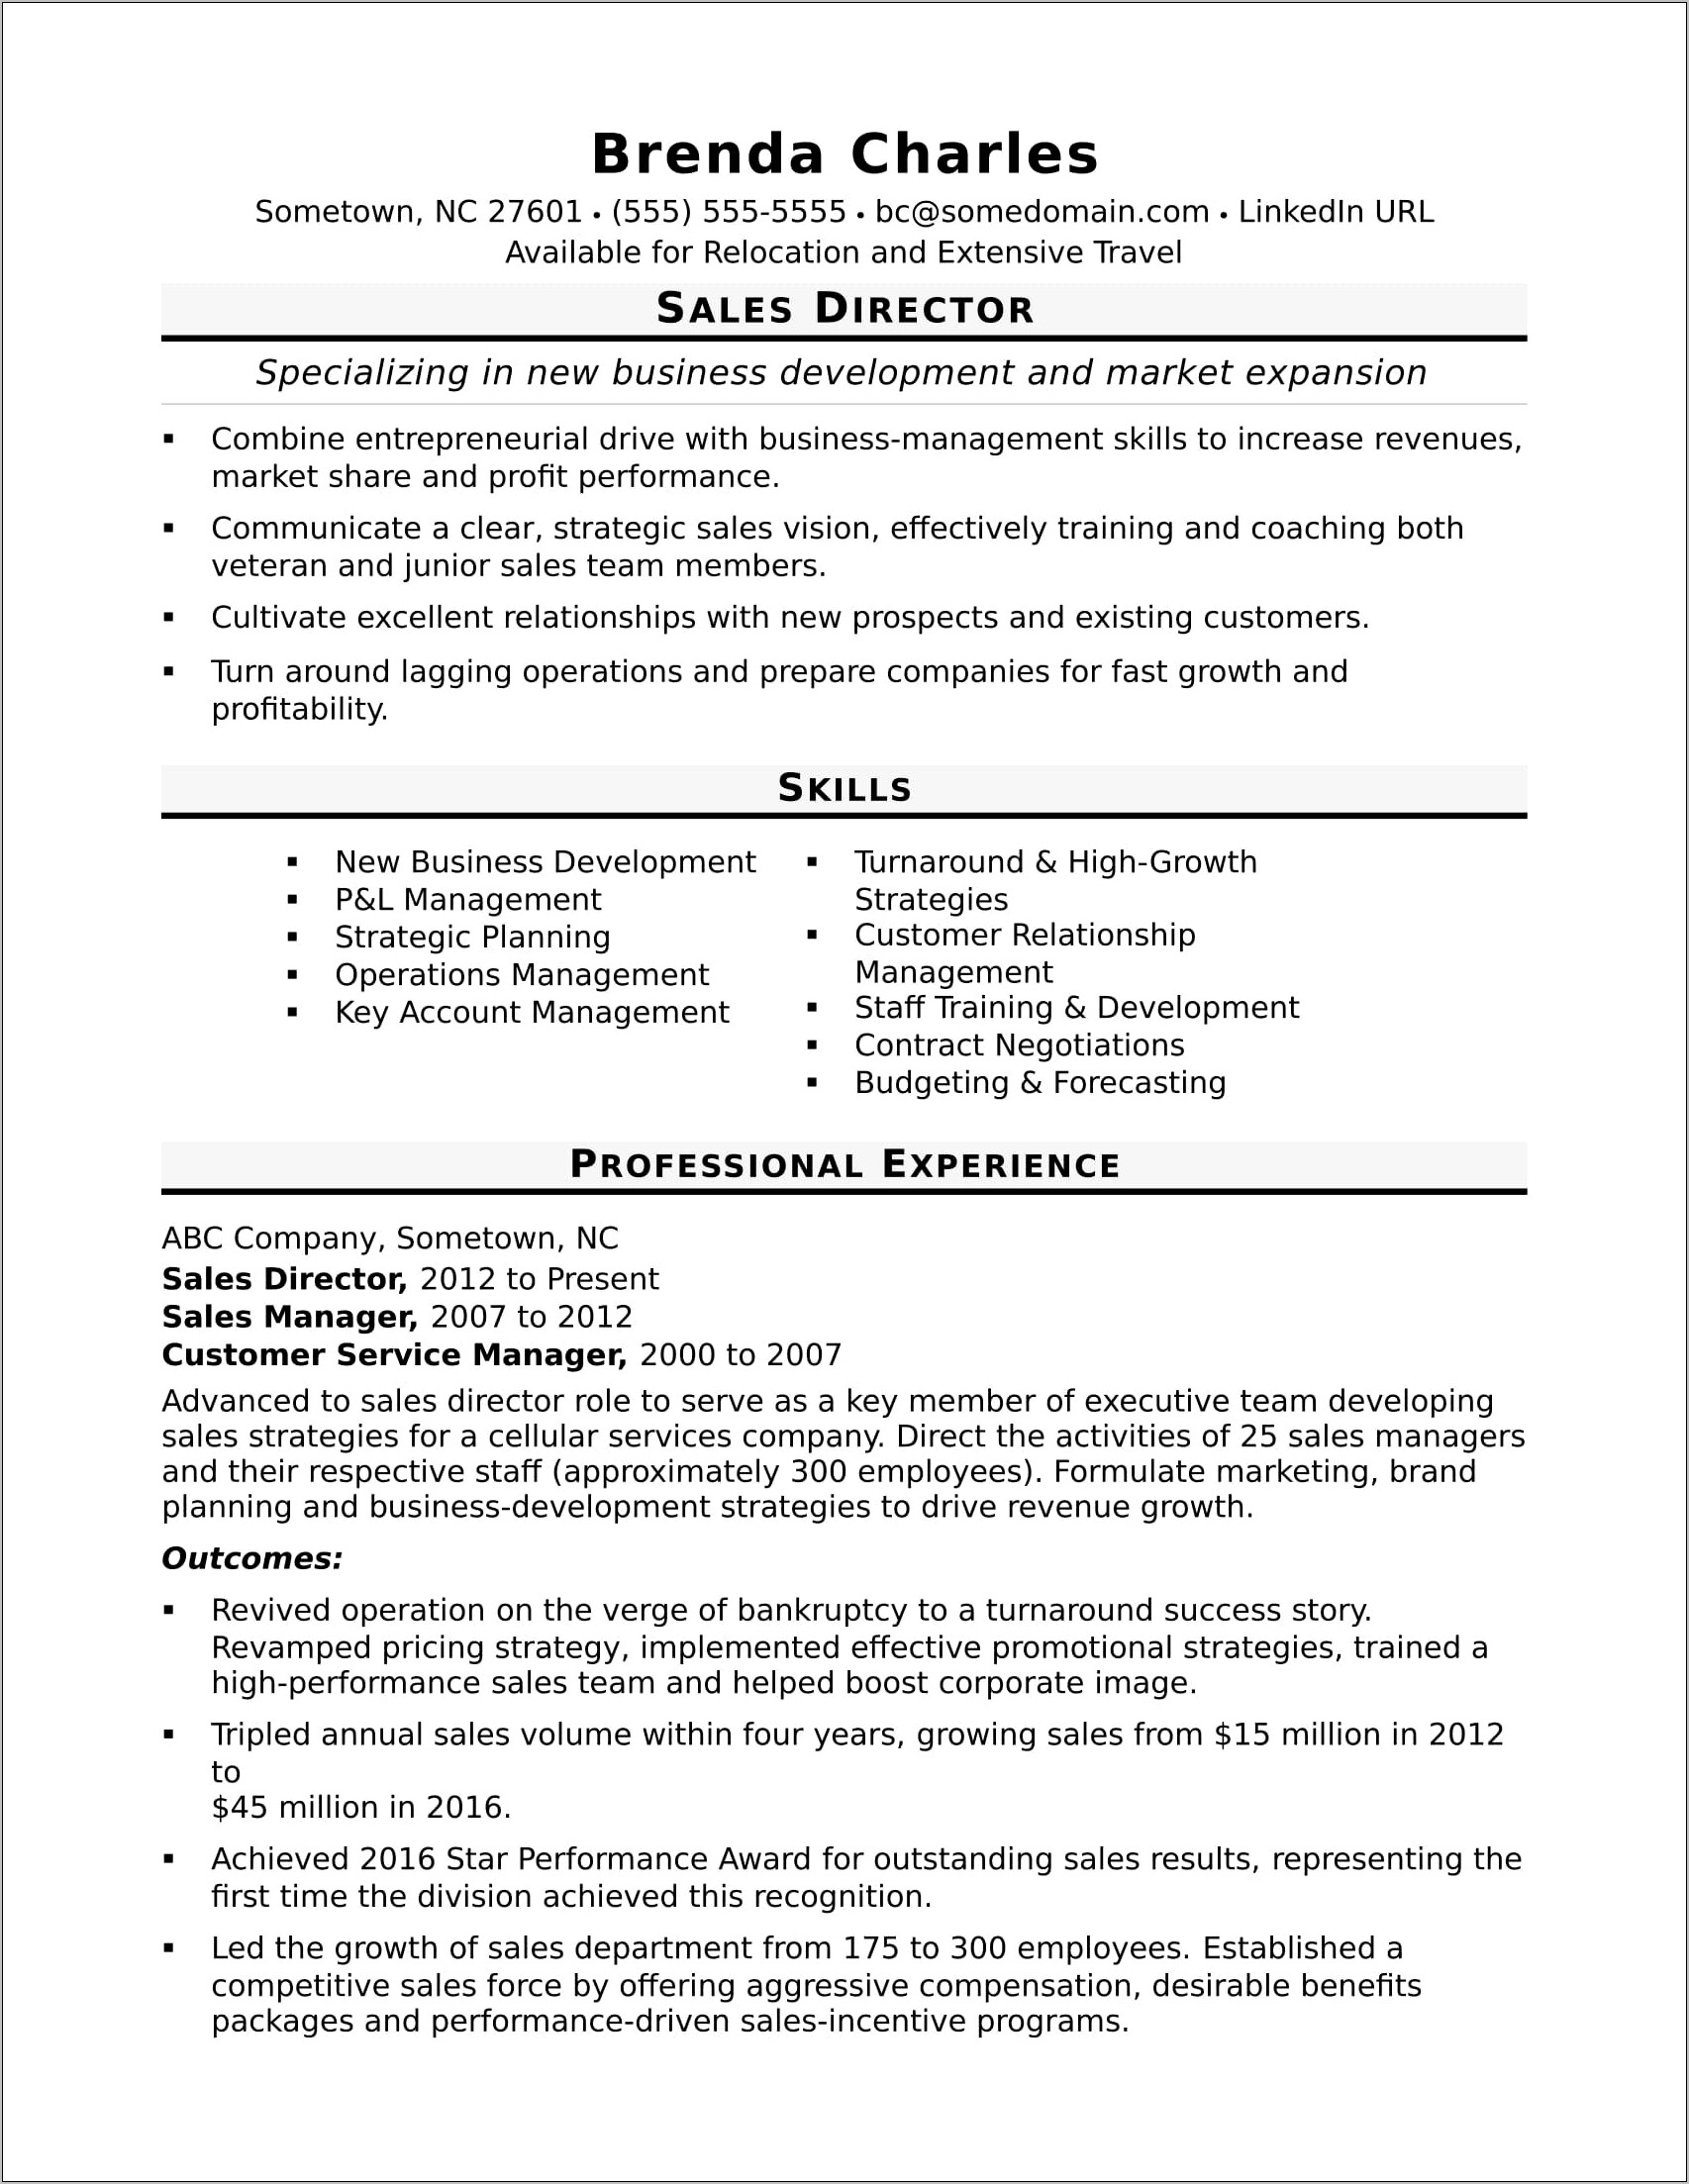 Resume Objective Statements For People Looking To Relocate